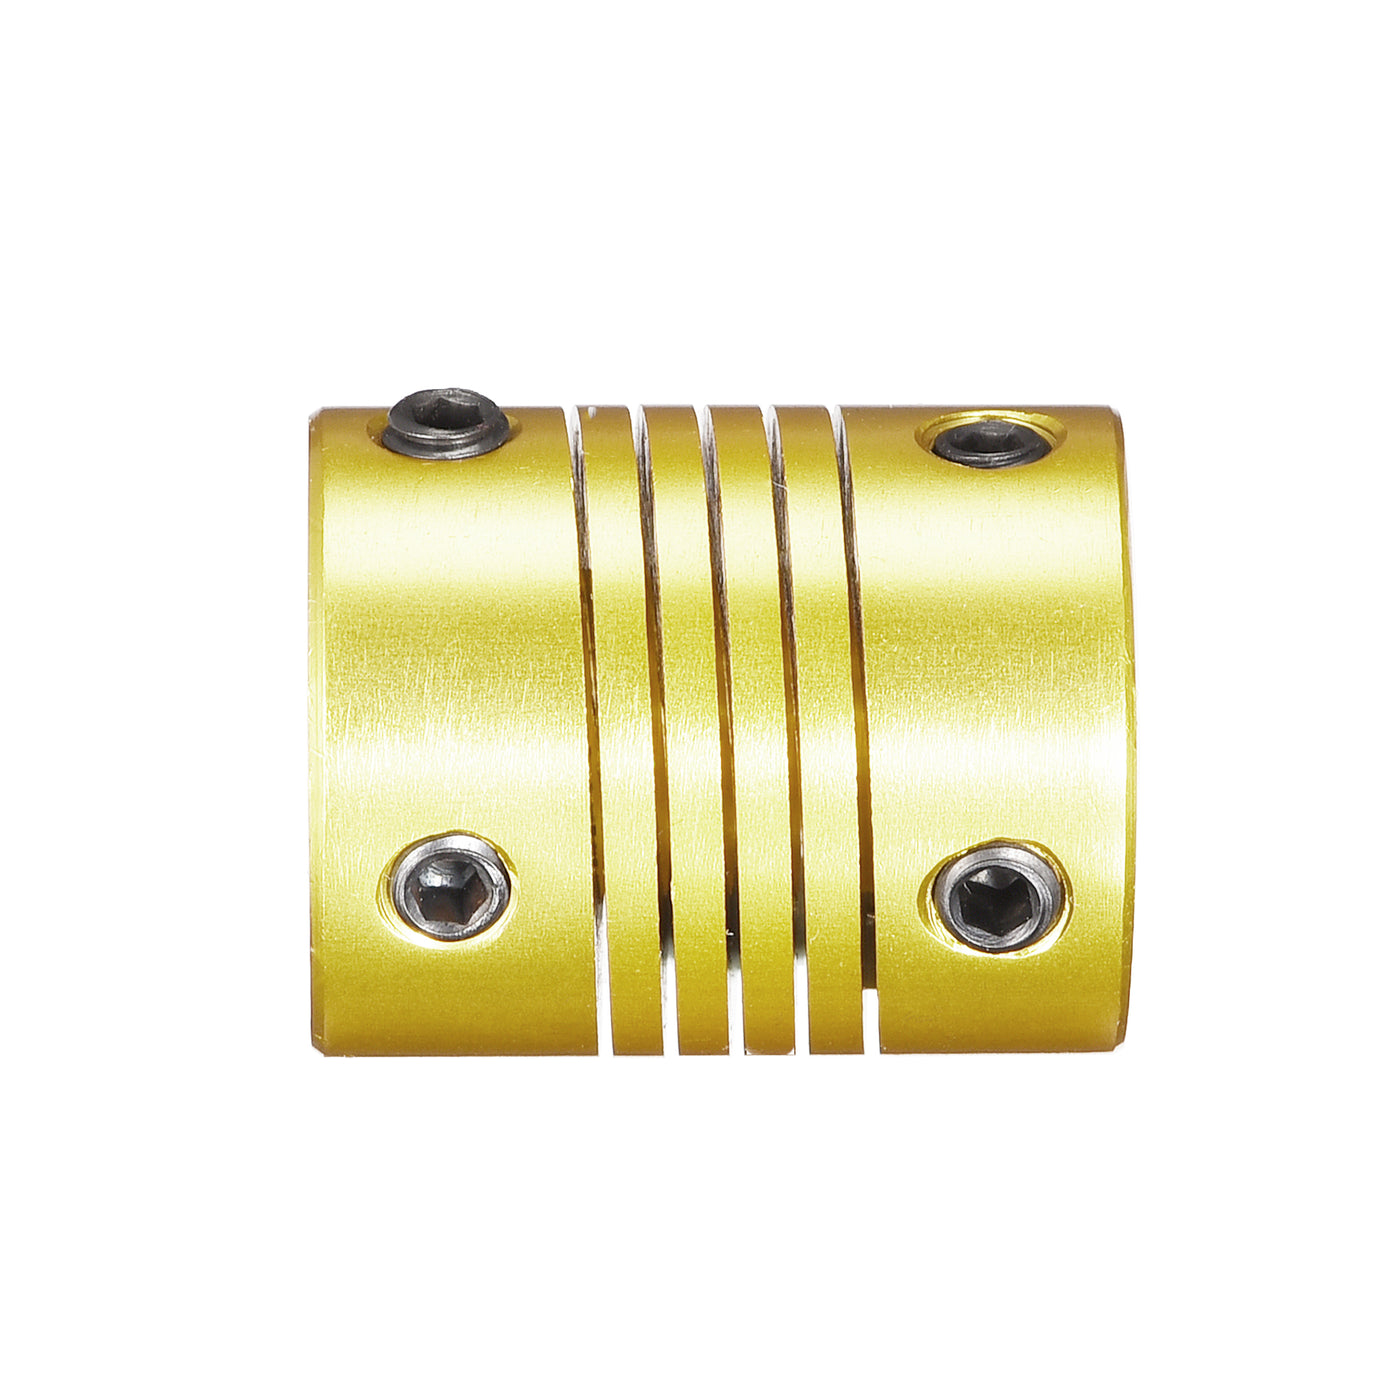 uxcell Uxcell 5 Pcs 5mm to 4mm Aluminum Alloy Shaft Coupling Flexible L25xD20 Golden Tone